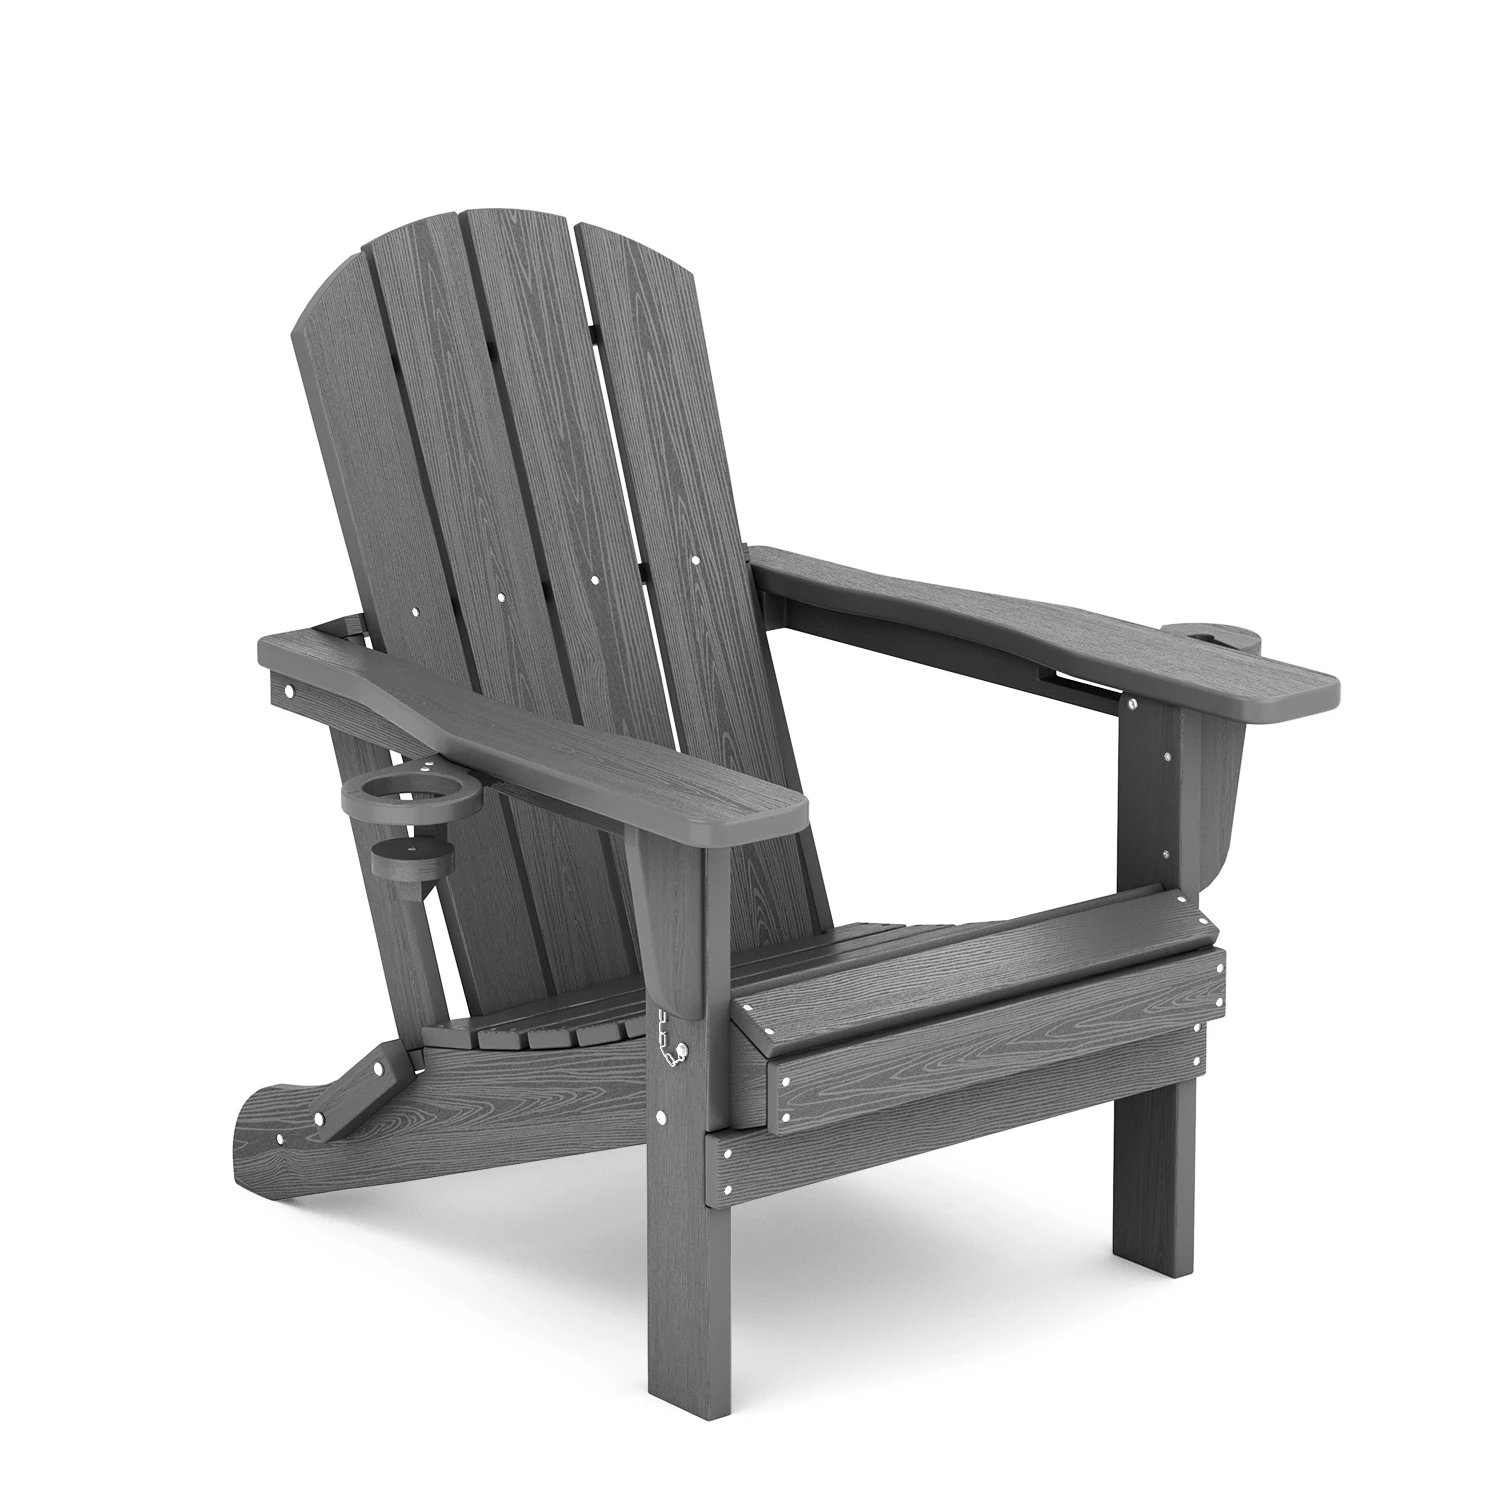 Classic Folding Adirondack Chair with Two Cup Holders in Dark Gray